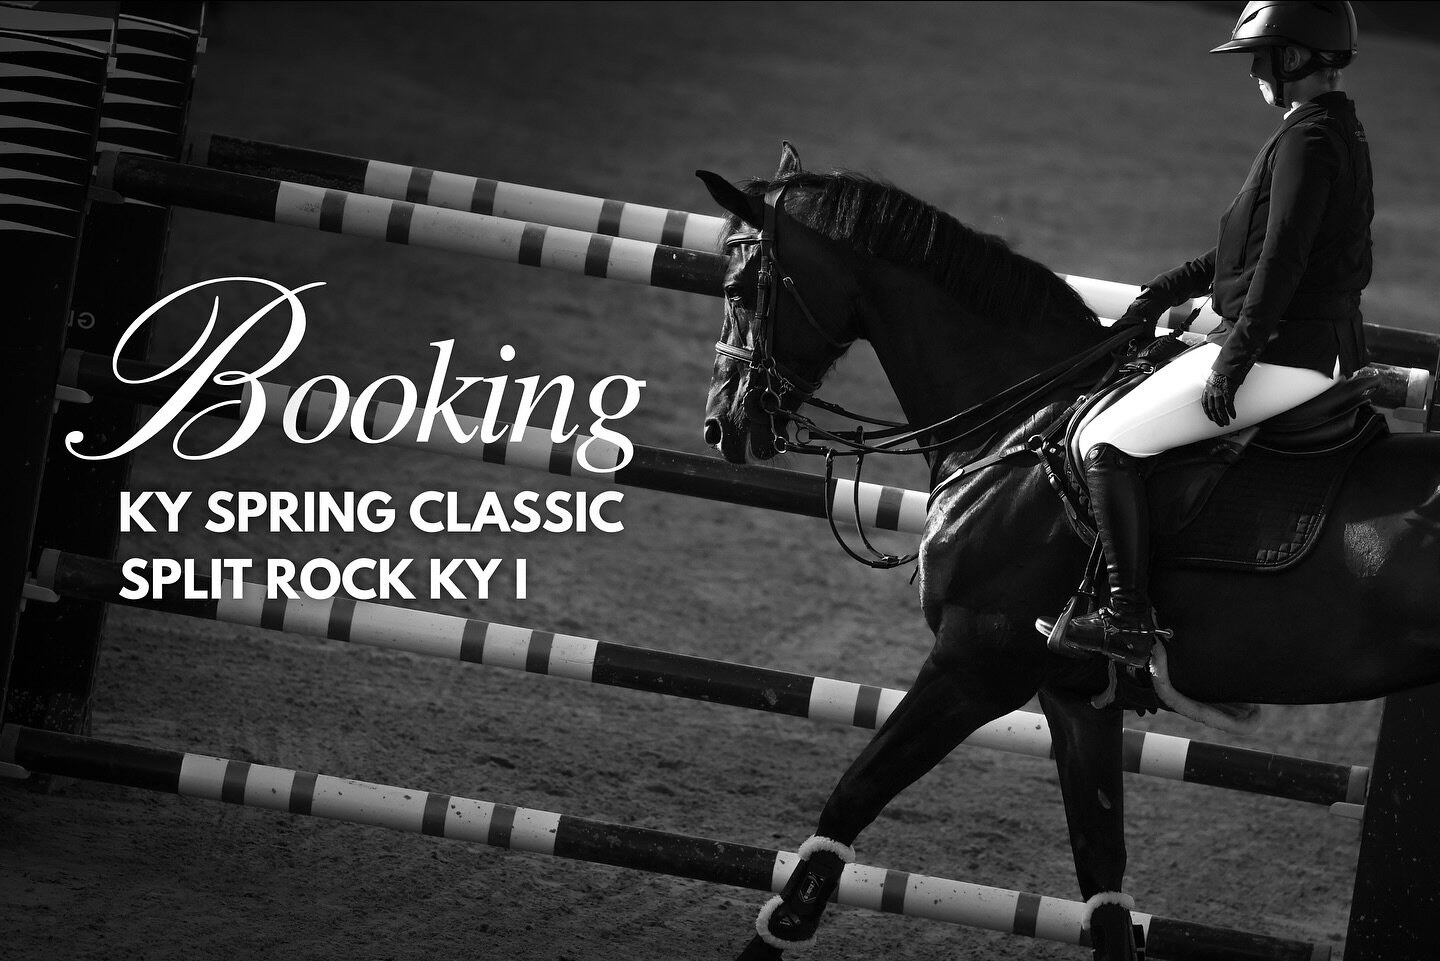 Now accepting clients for&hellip;

📍Kentucky Spring Classic 
📍Split Rock Kentucky I 

Now booking video and photo clients for spring shows in Kentucky! Space is limited so message us to learn more about our media packages and reserve your spot for 